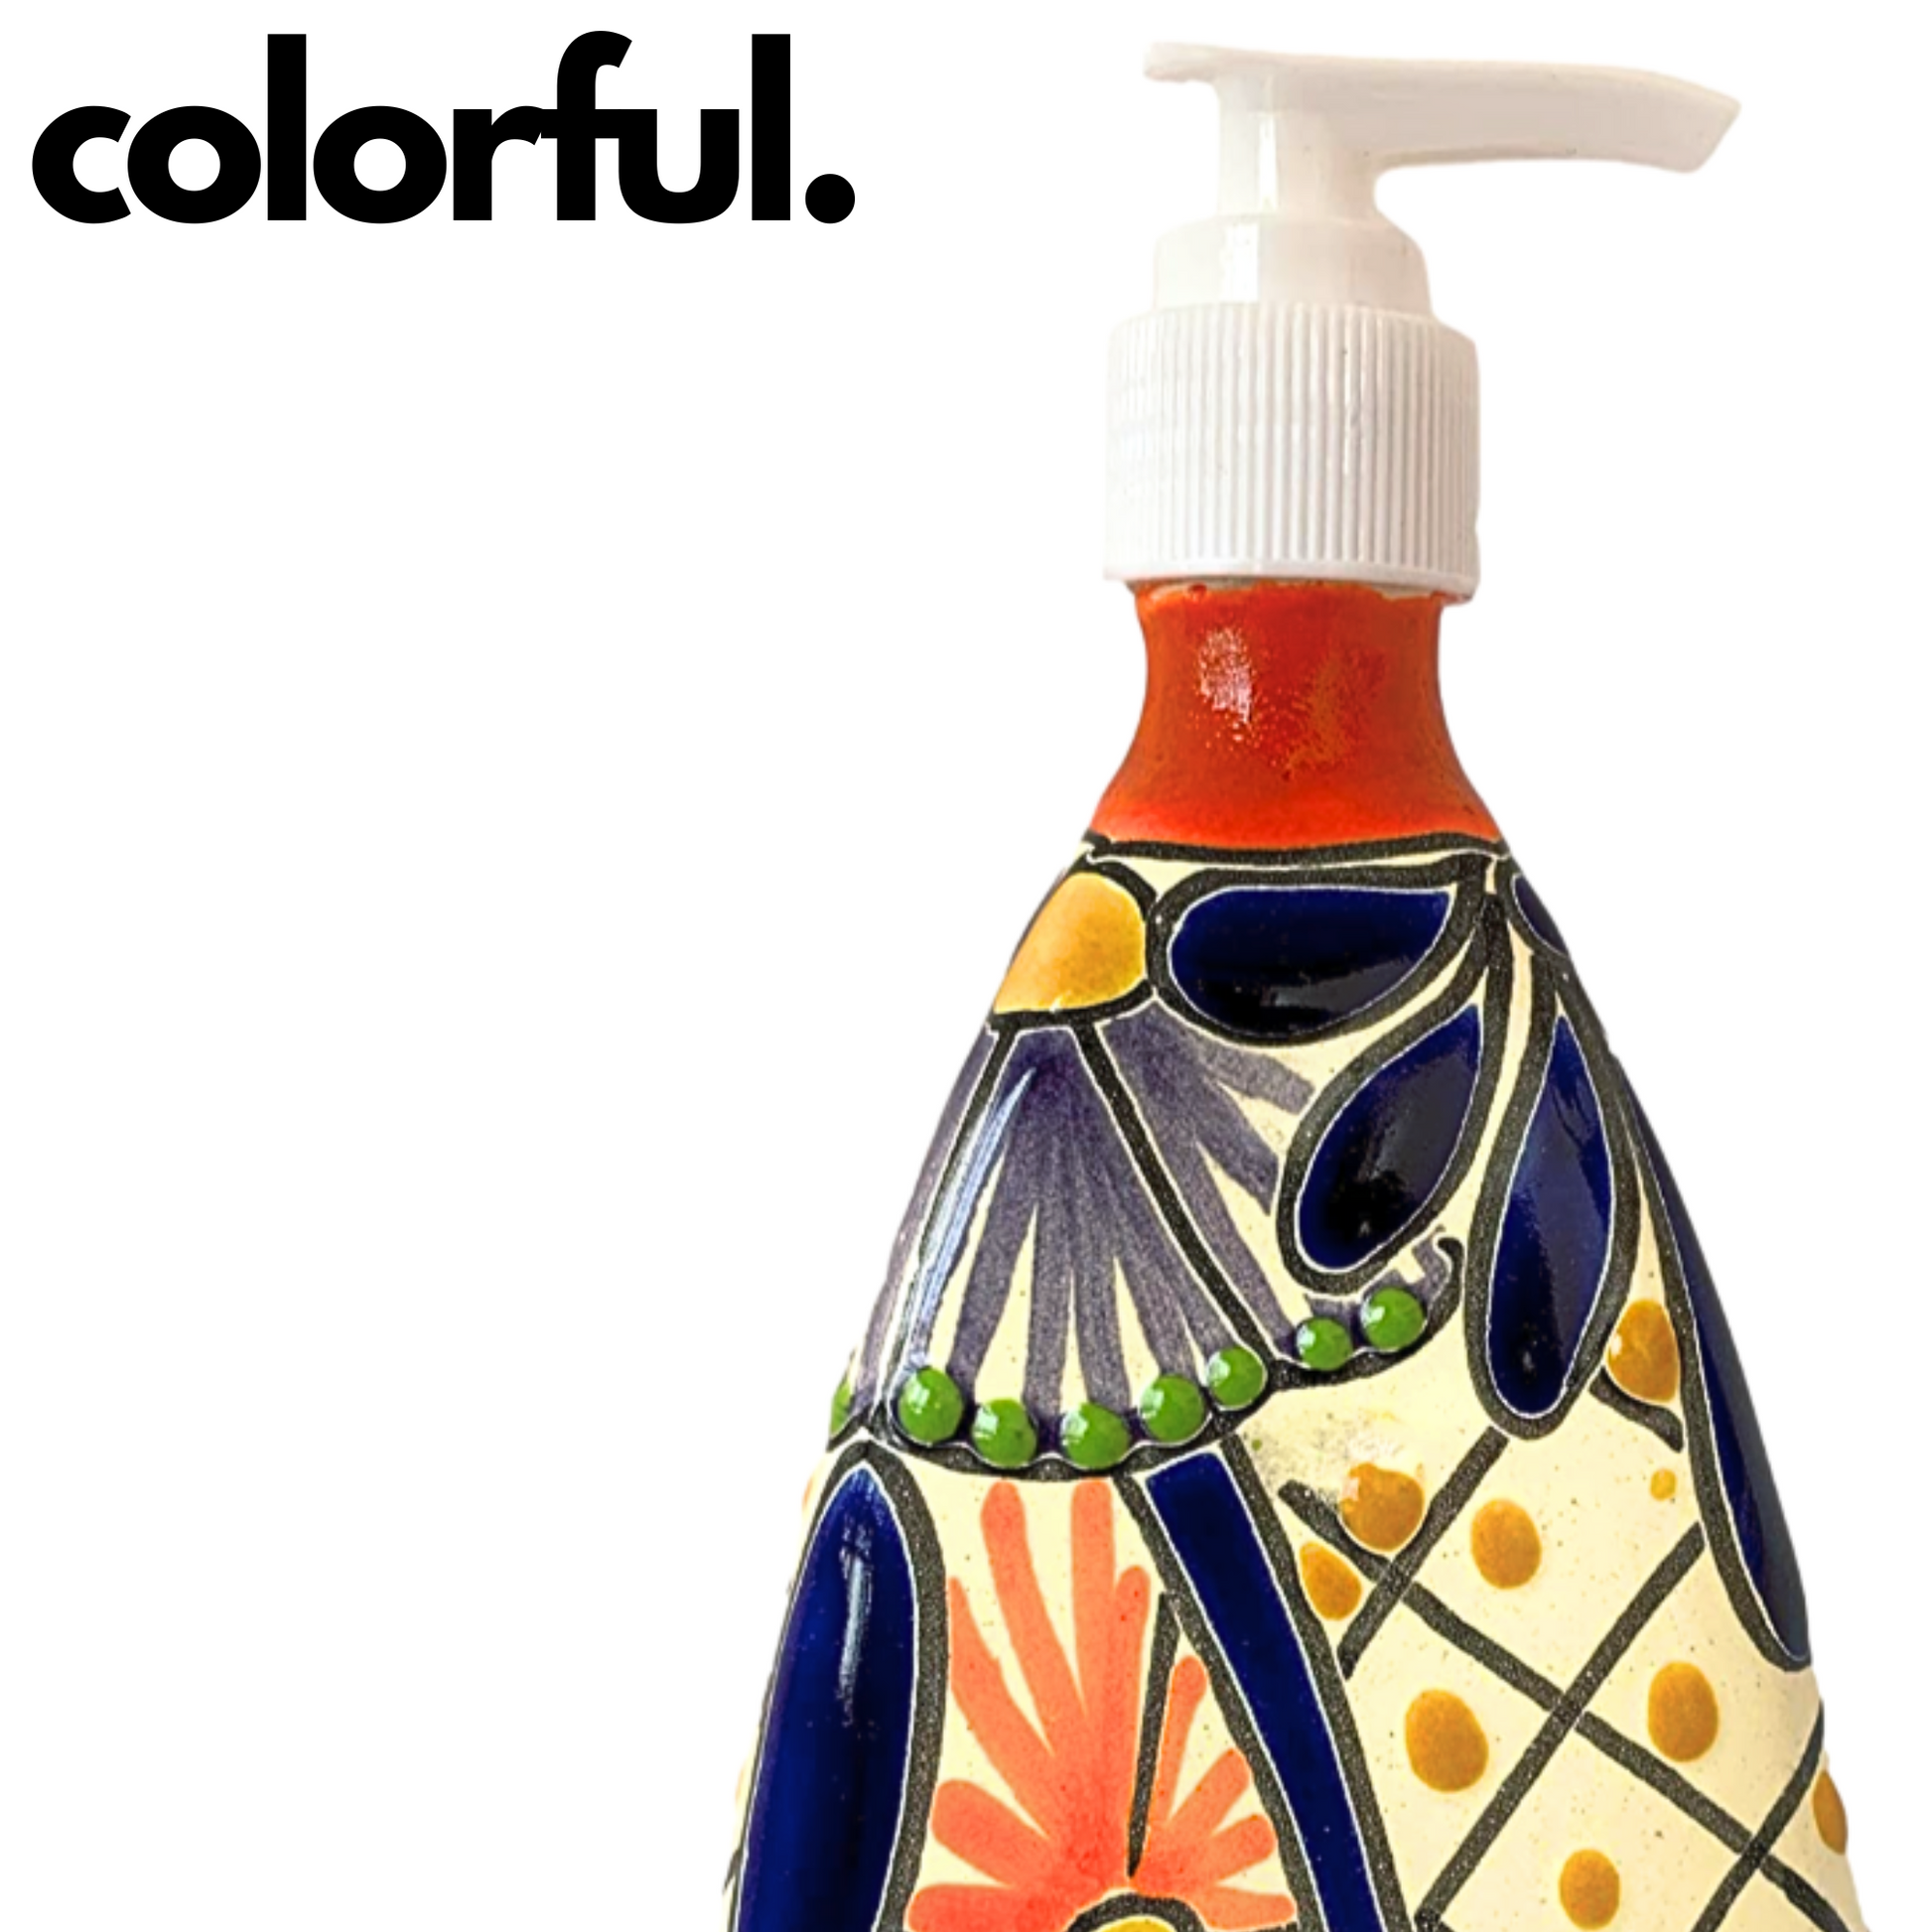 close up of Pyramid-shaped Ceramic Soap Dispenser, hand-painted by Mexican artisans, perfect for adding a vibrant touch to kitchen or bathroom decor.